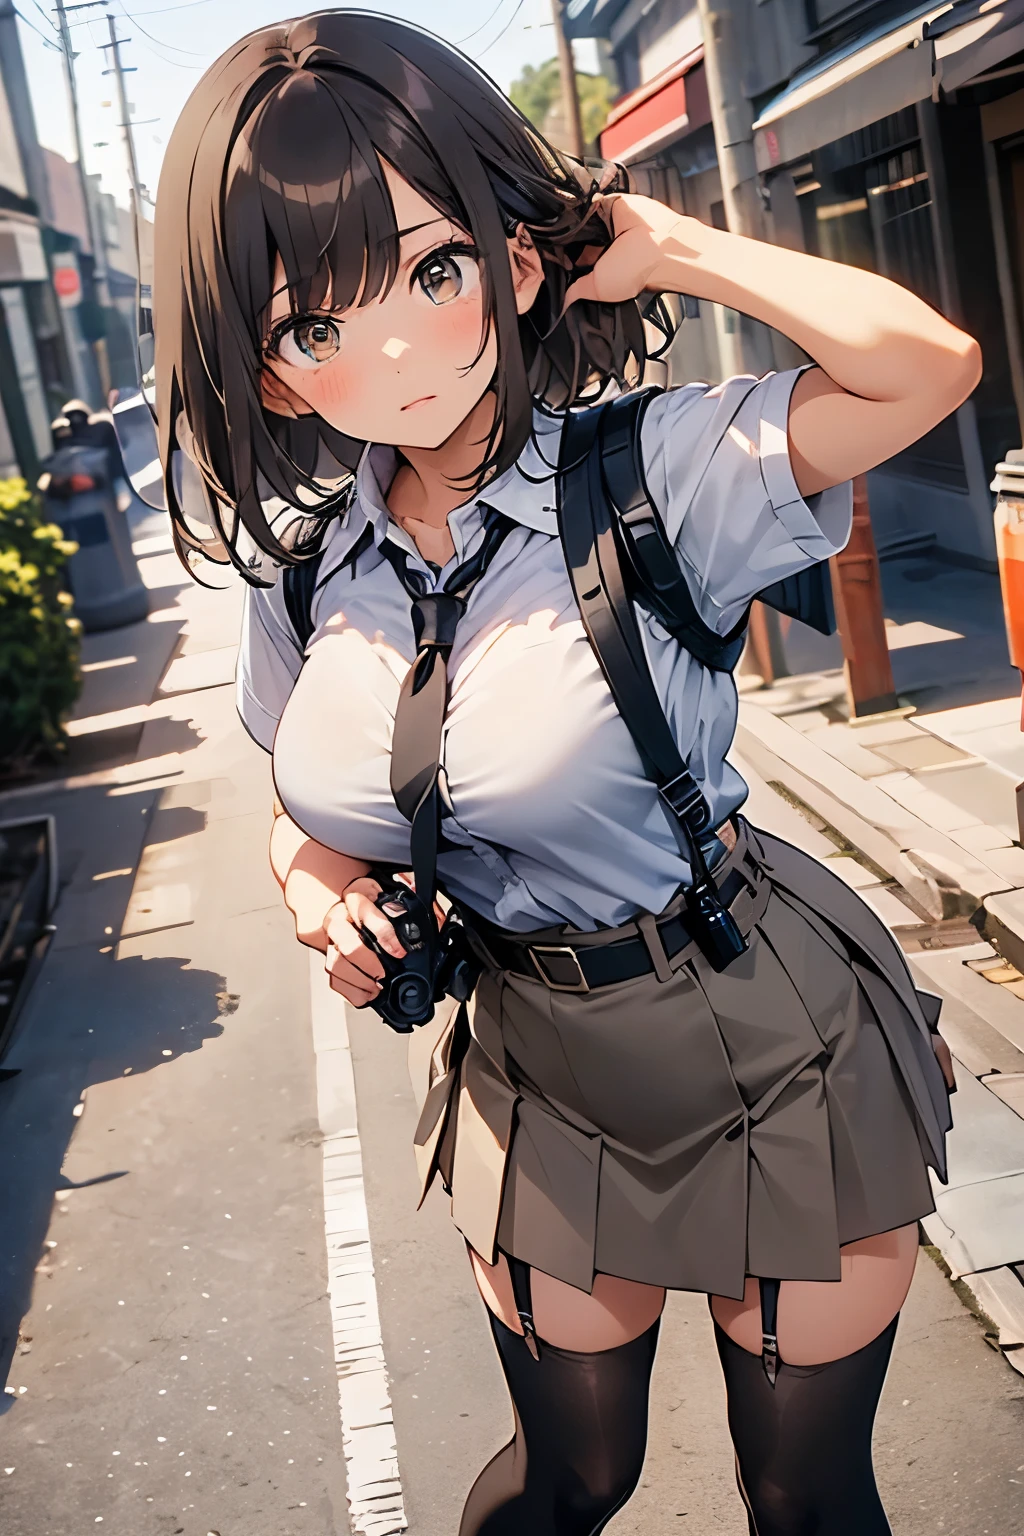 brown hair、looking at the viewer　　suspenders　　　Bulging big breasts　　 　 　　　　Black miniskirt　ガーターbelt　knee high socks　　　　　　Gaze　　　small face　bangs 　　　　　Beauty　　hands up　　 　Gaze 　black boots 　provocation　　　one person 　　　cutter shirt　　Panty shot　hands behind　put your hands behind your back　Hands behind your back　With your hands behind your back　armed　holster　handgun　belt